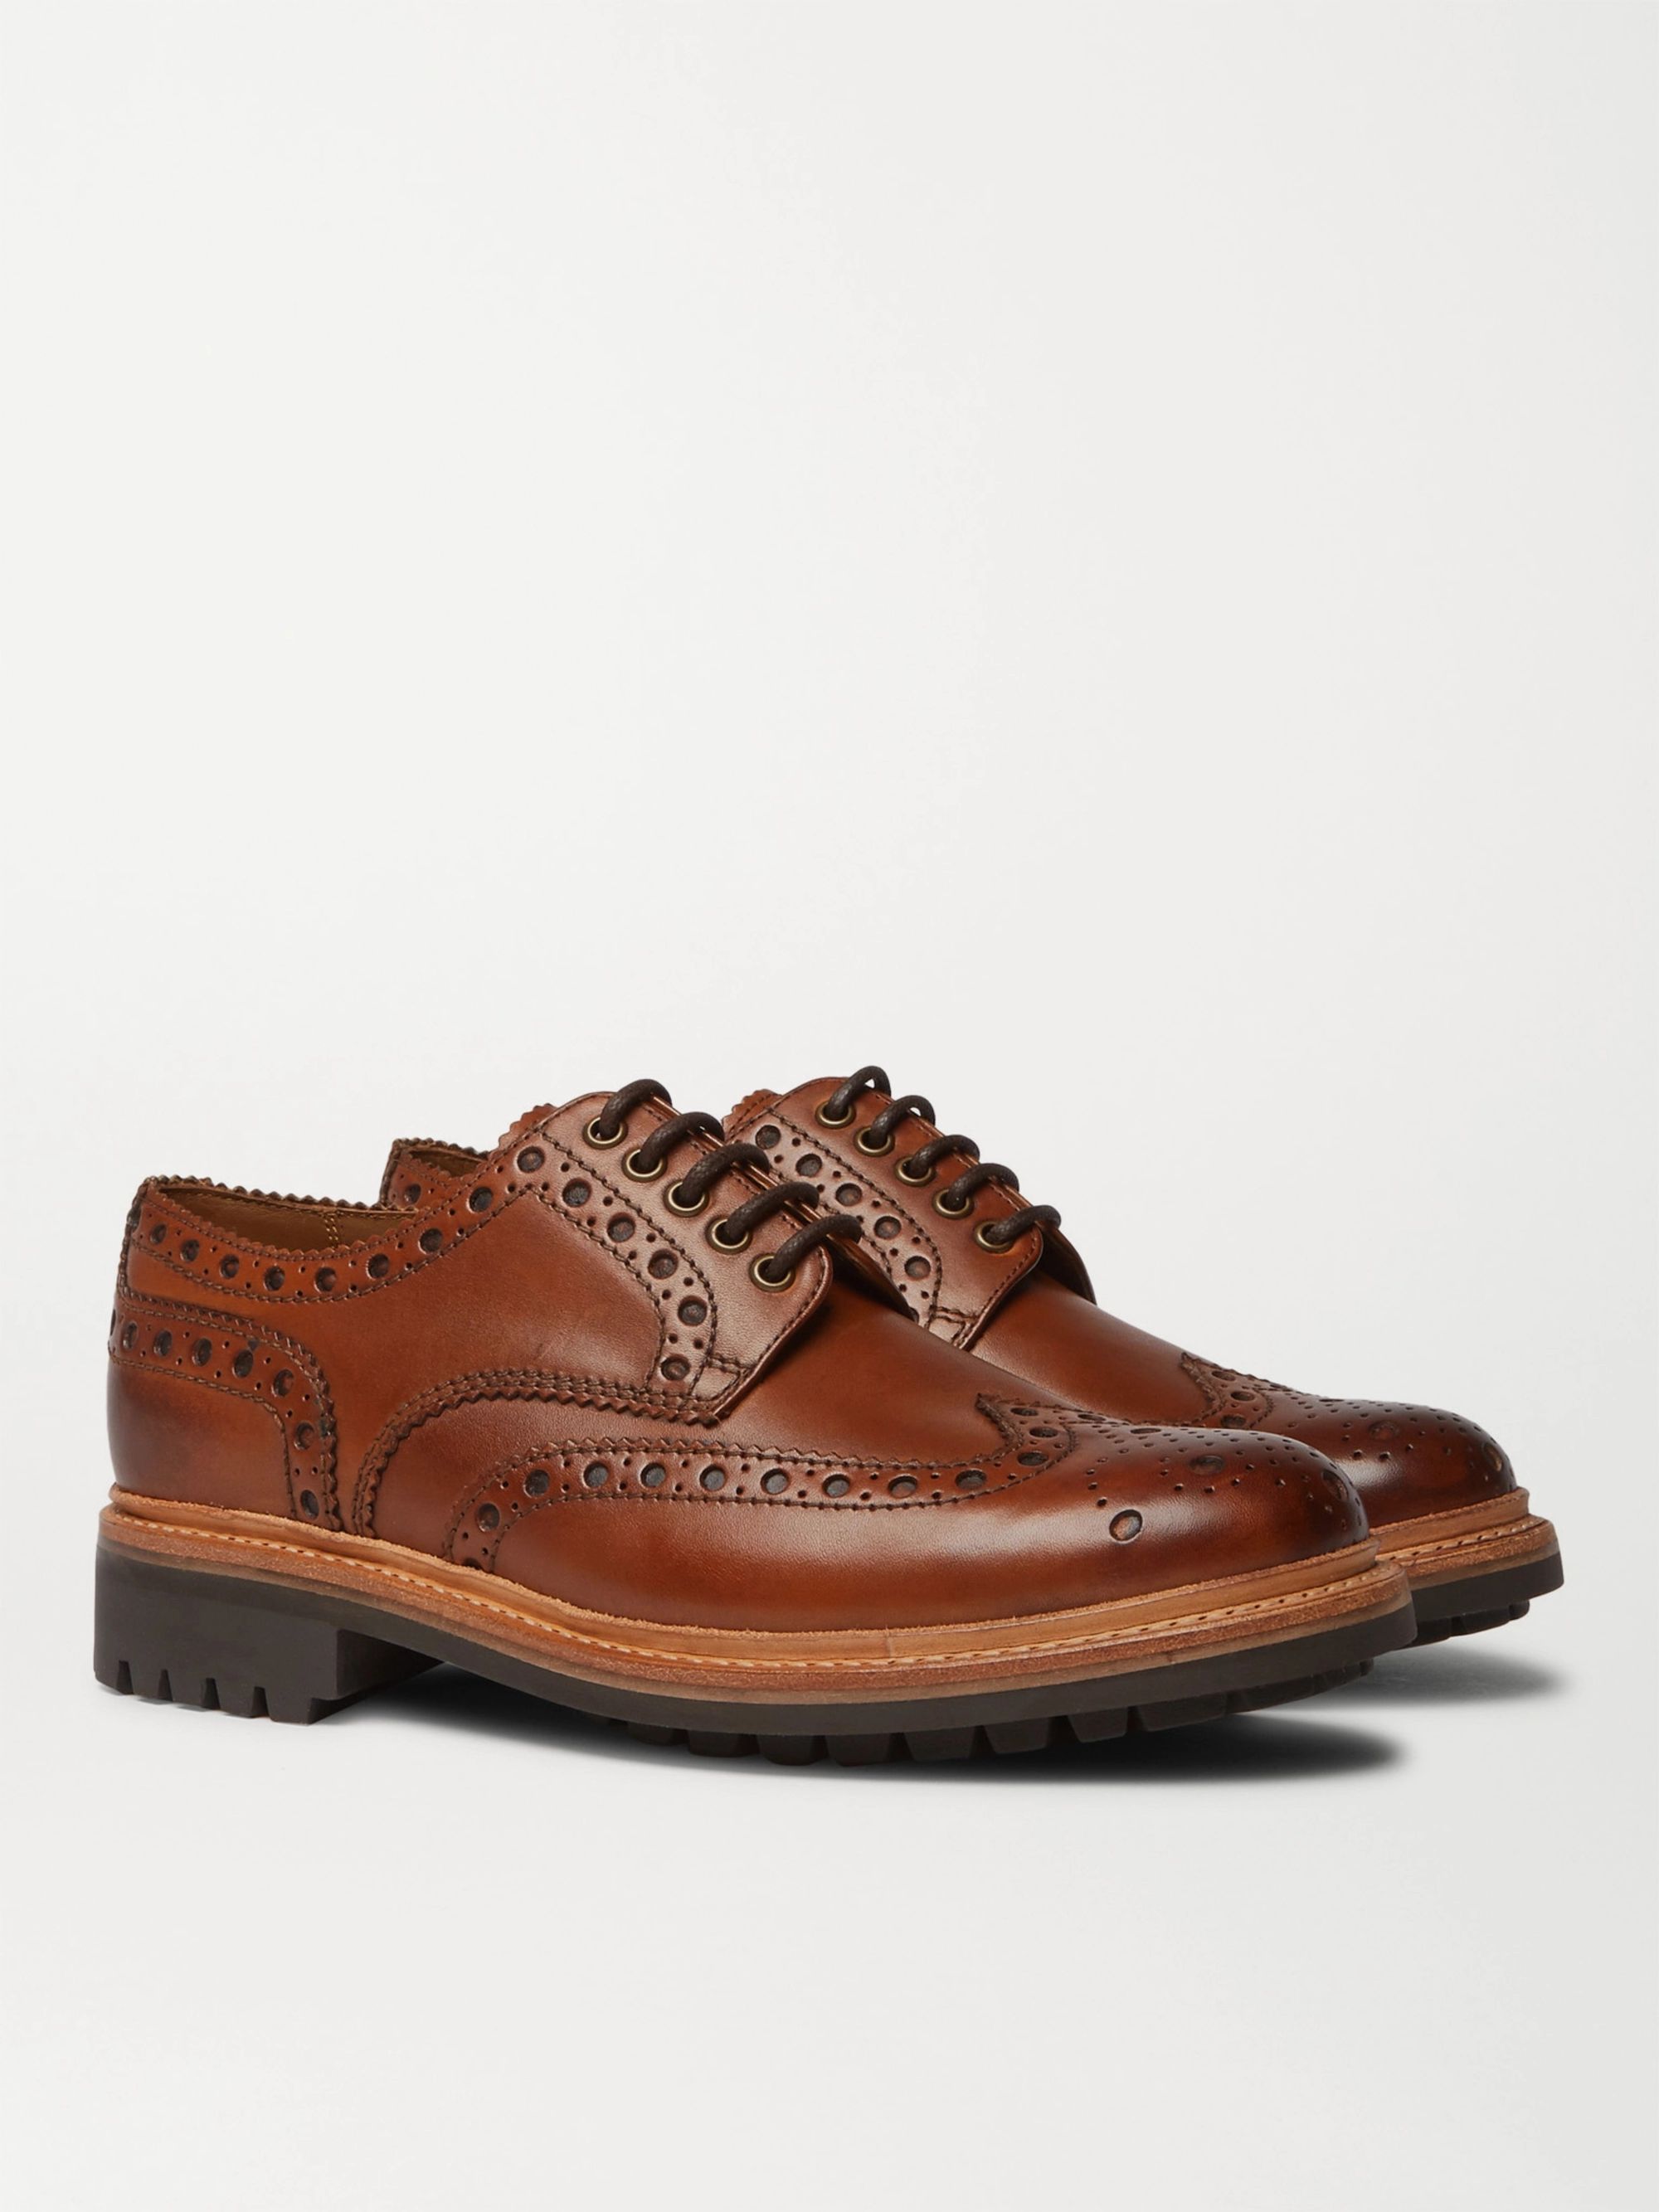 grenson shoes archie